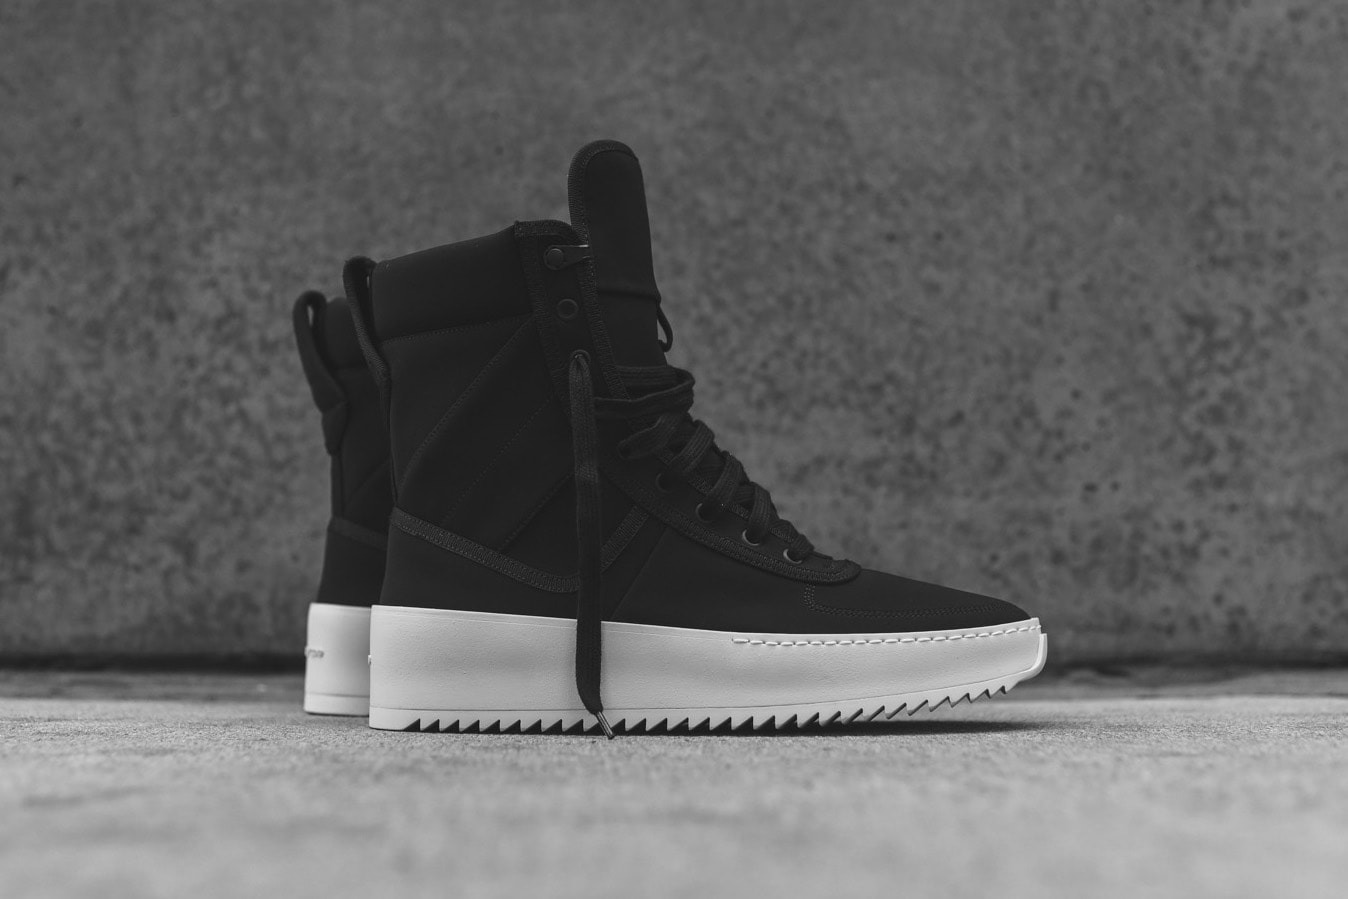 Industry & sale - AFTERGAME SNEAKER BOOT The Aftergame